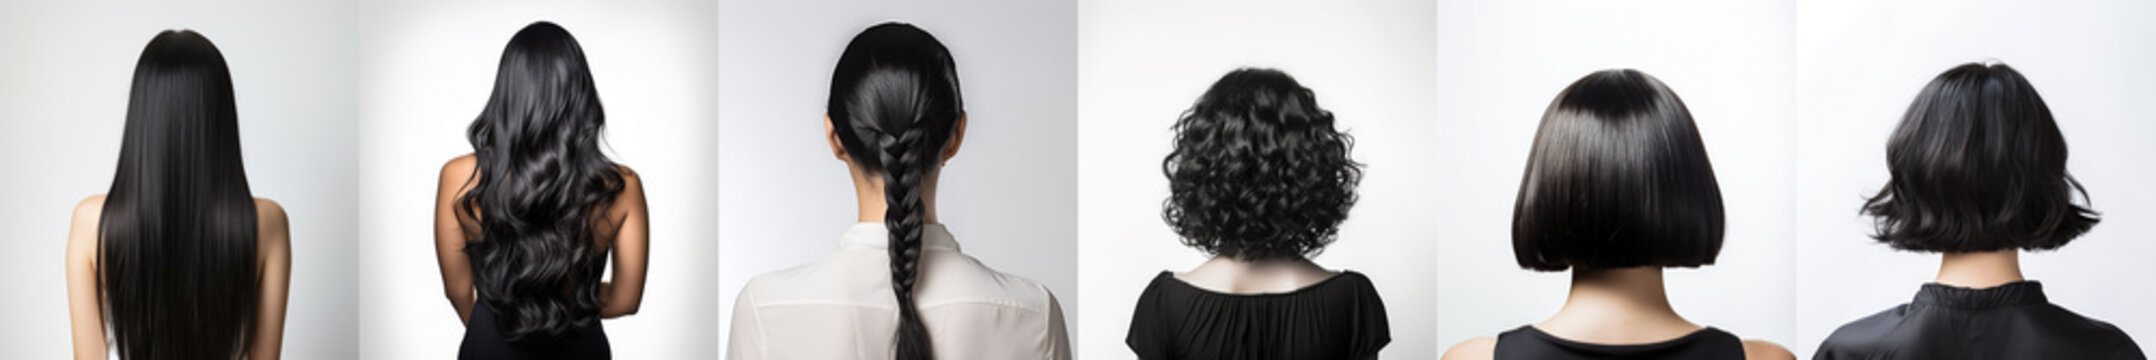 Various haircuts for woman with black hair - long straight, wavy, braided ponytail, small perm, bobcut and short hairs. View from behind on white background. Generative AI